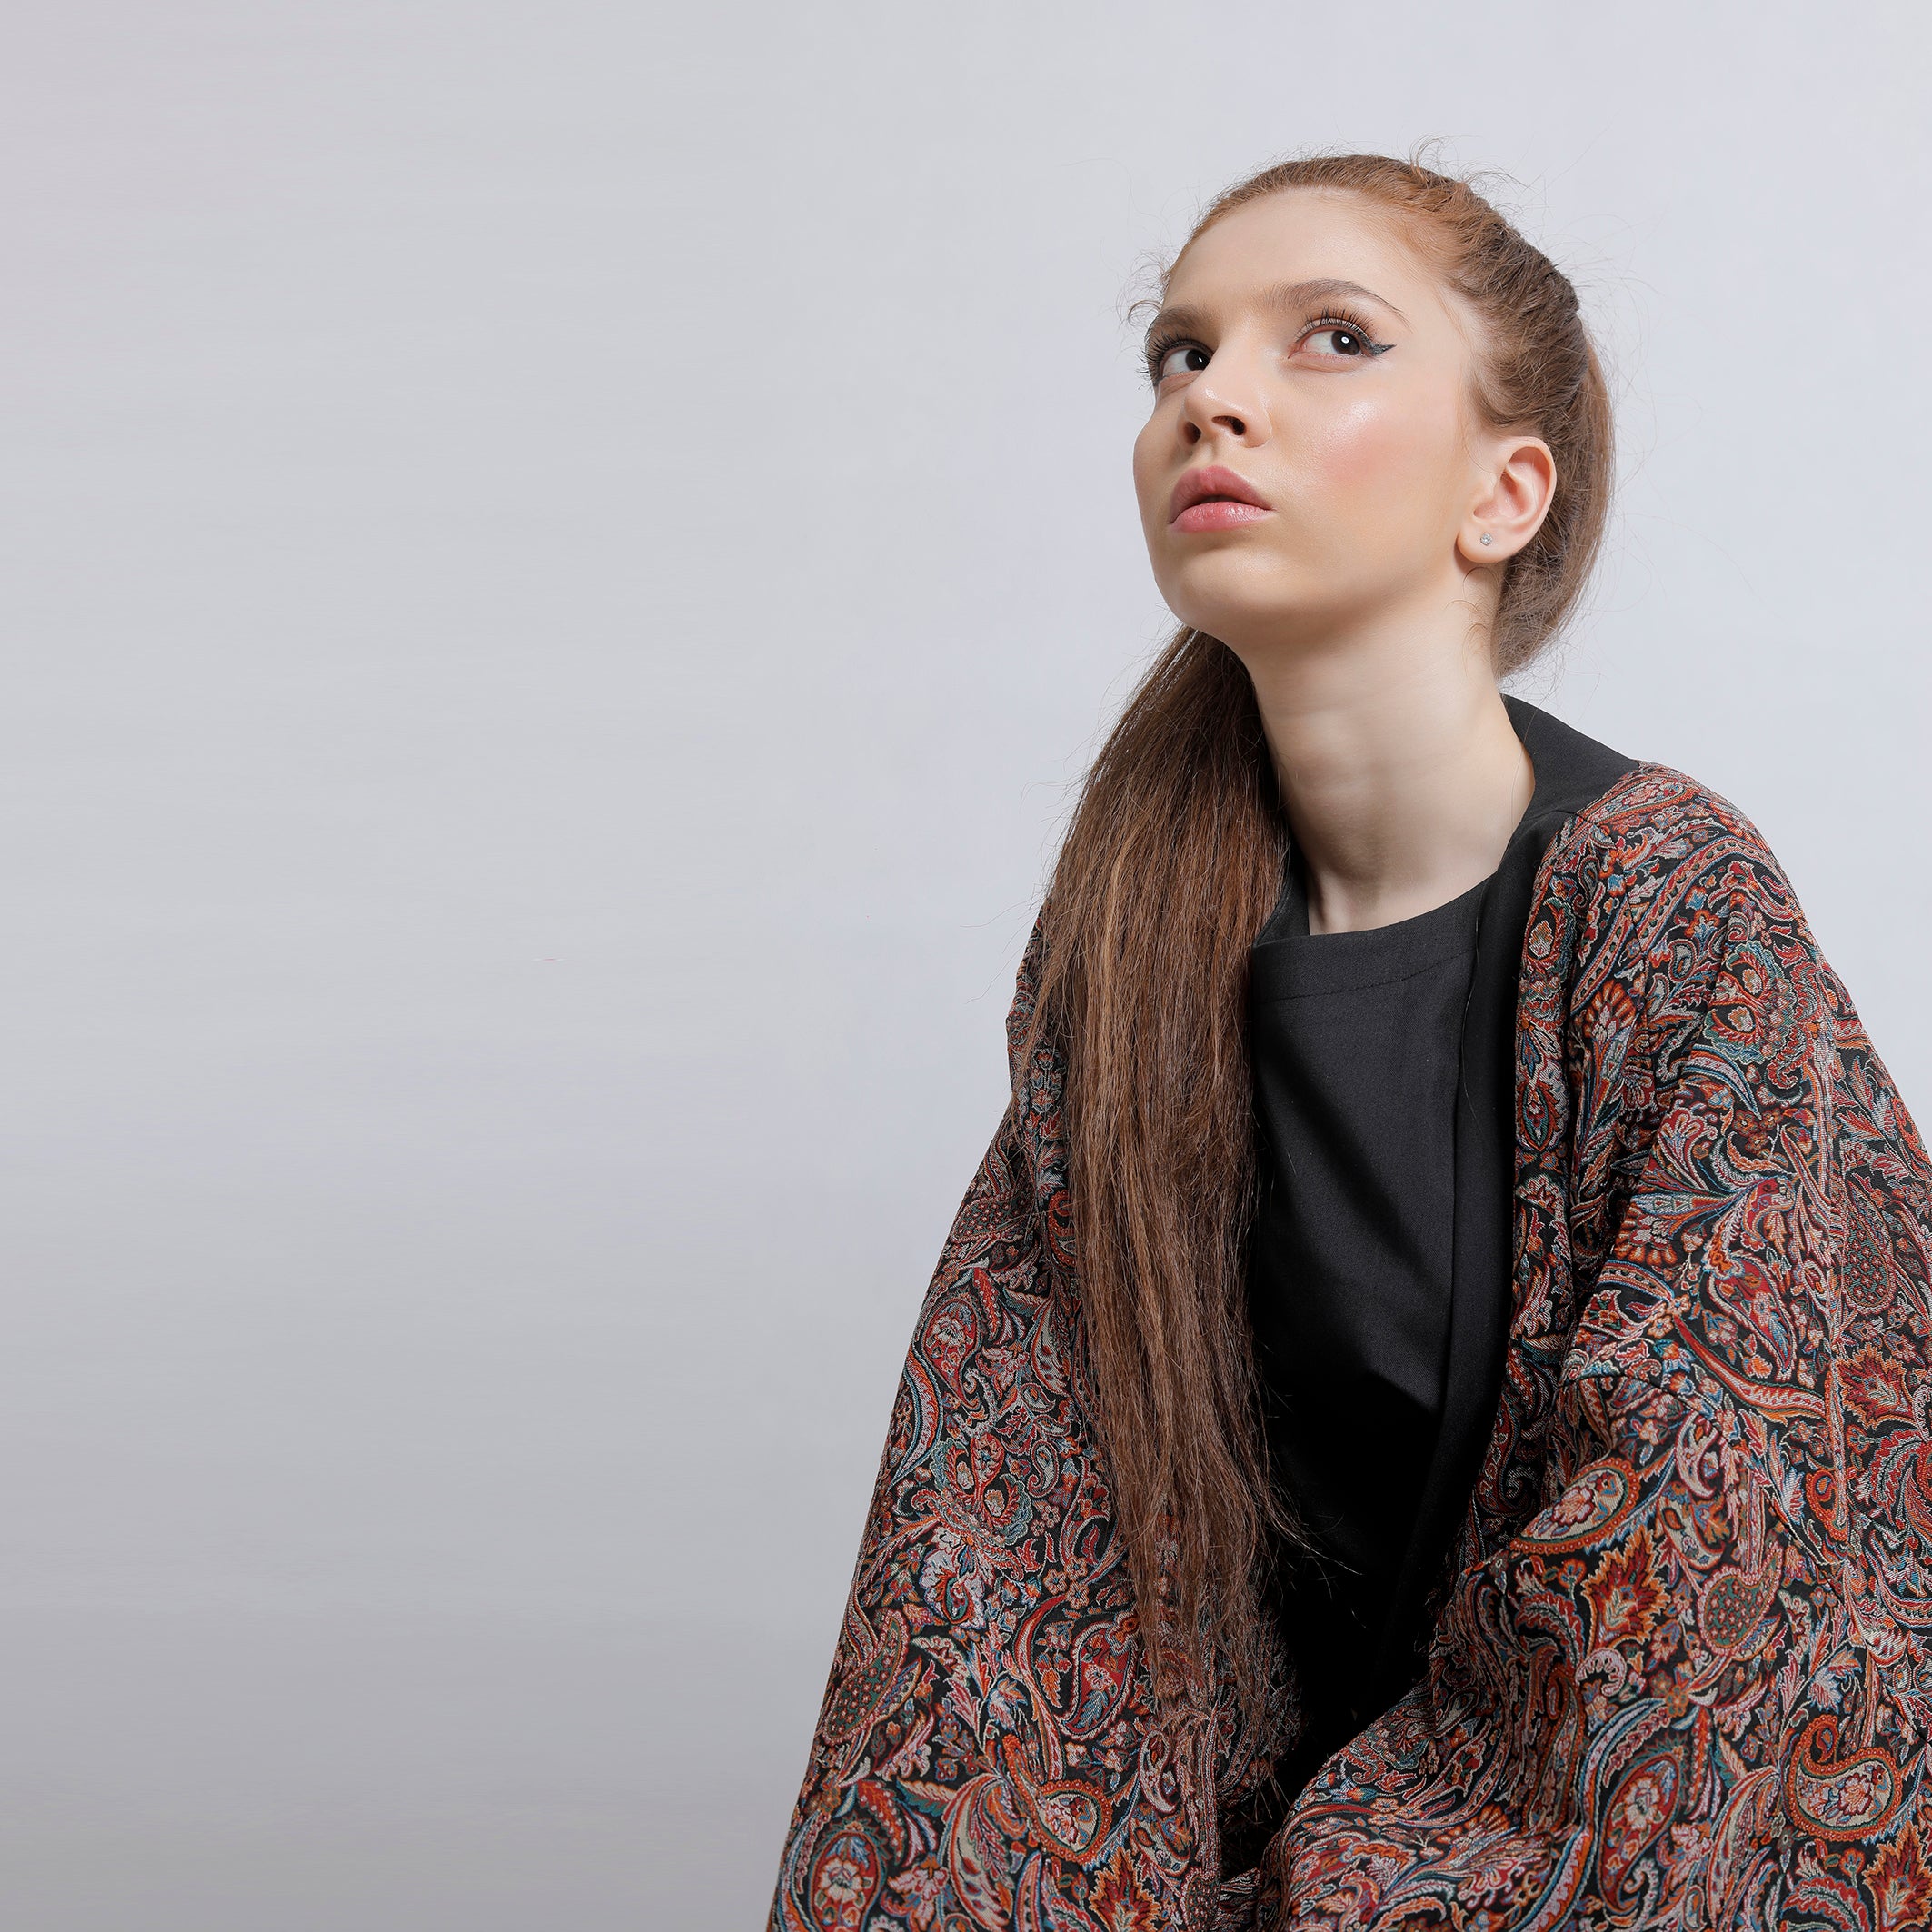 TERMEH, A ONE-OF-A-KIND WOVEN FABRIC